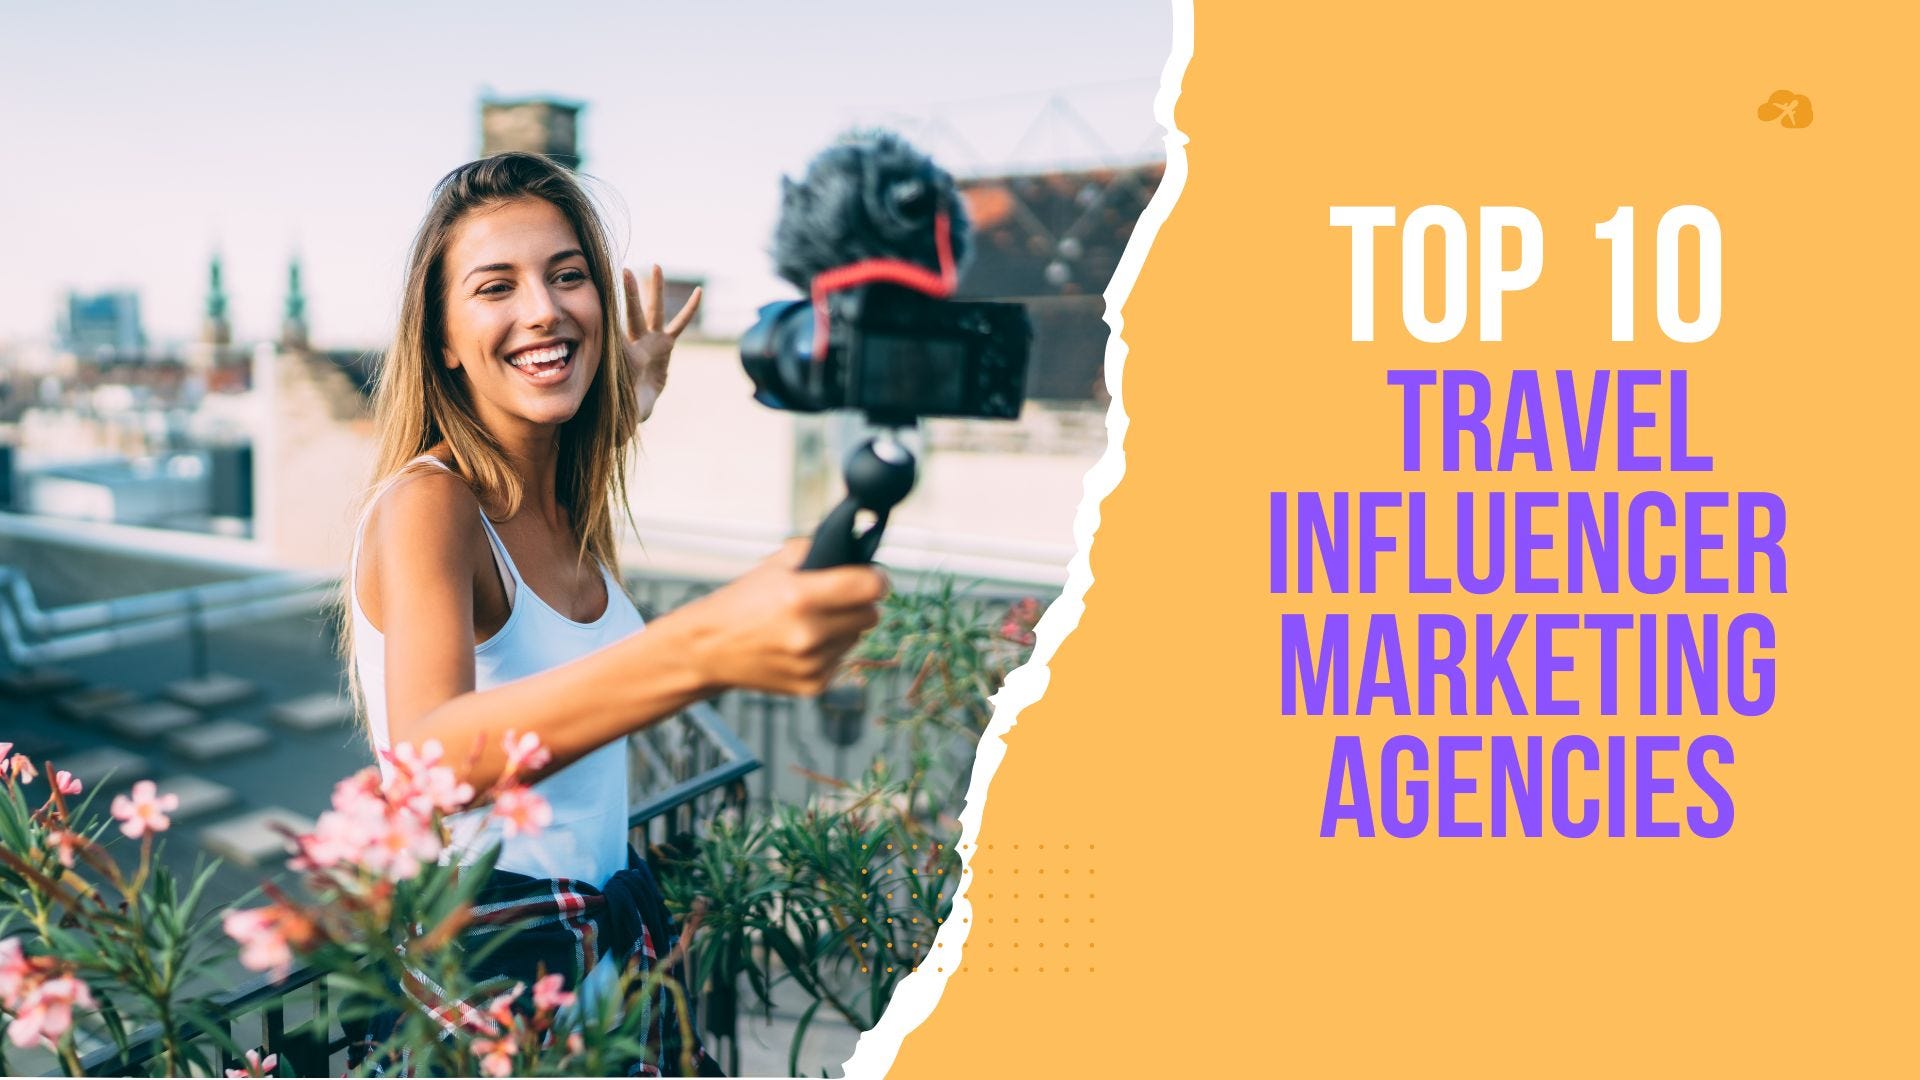 Top 10 Travel Influencer Marketing Agencies in India